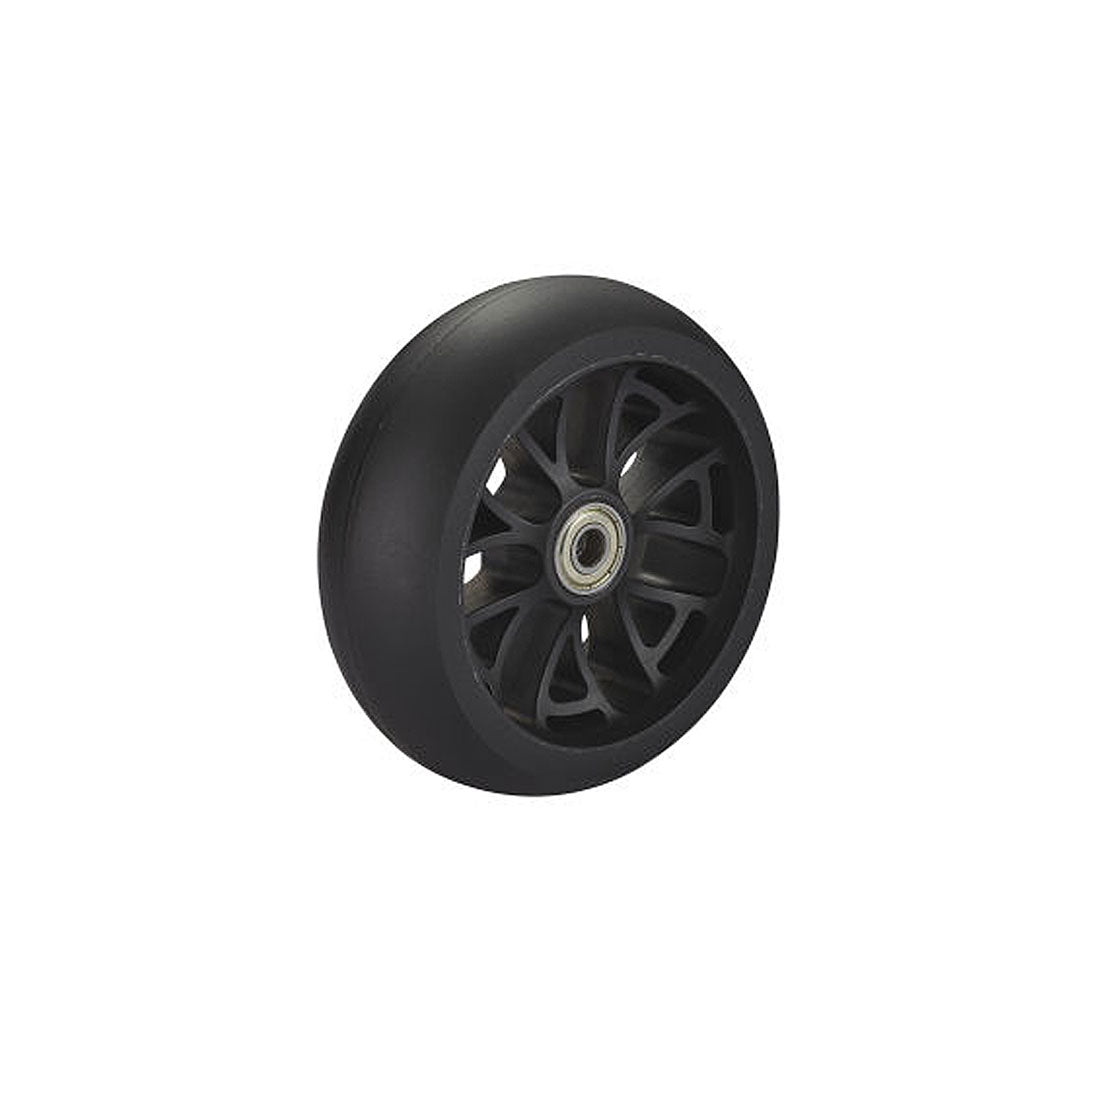 Micro Maxi Deluxe Pro Front 120mm Wheel - 4770 Scooter Wheels